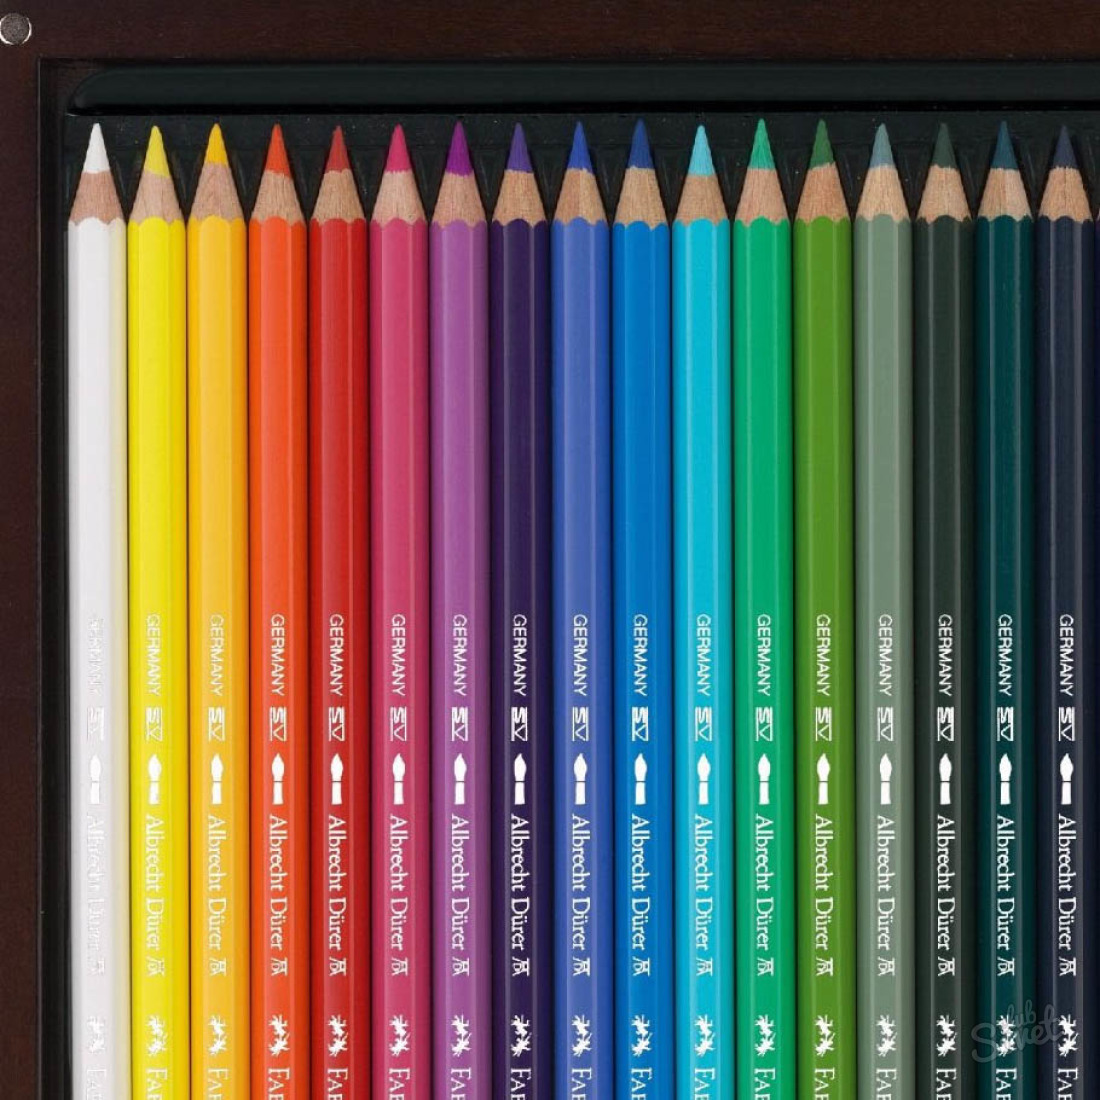 How to draw watercolor pencils